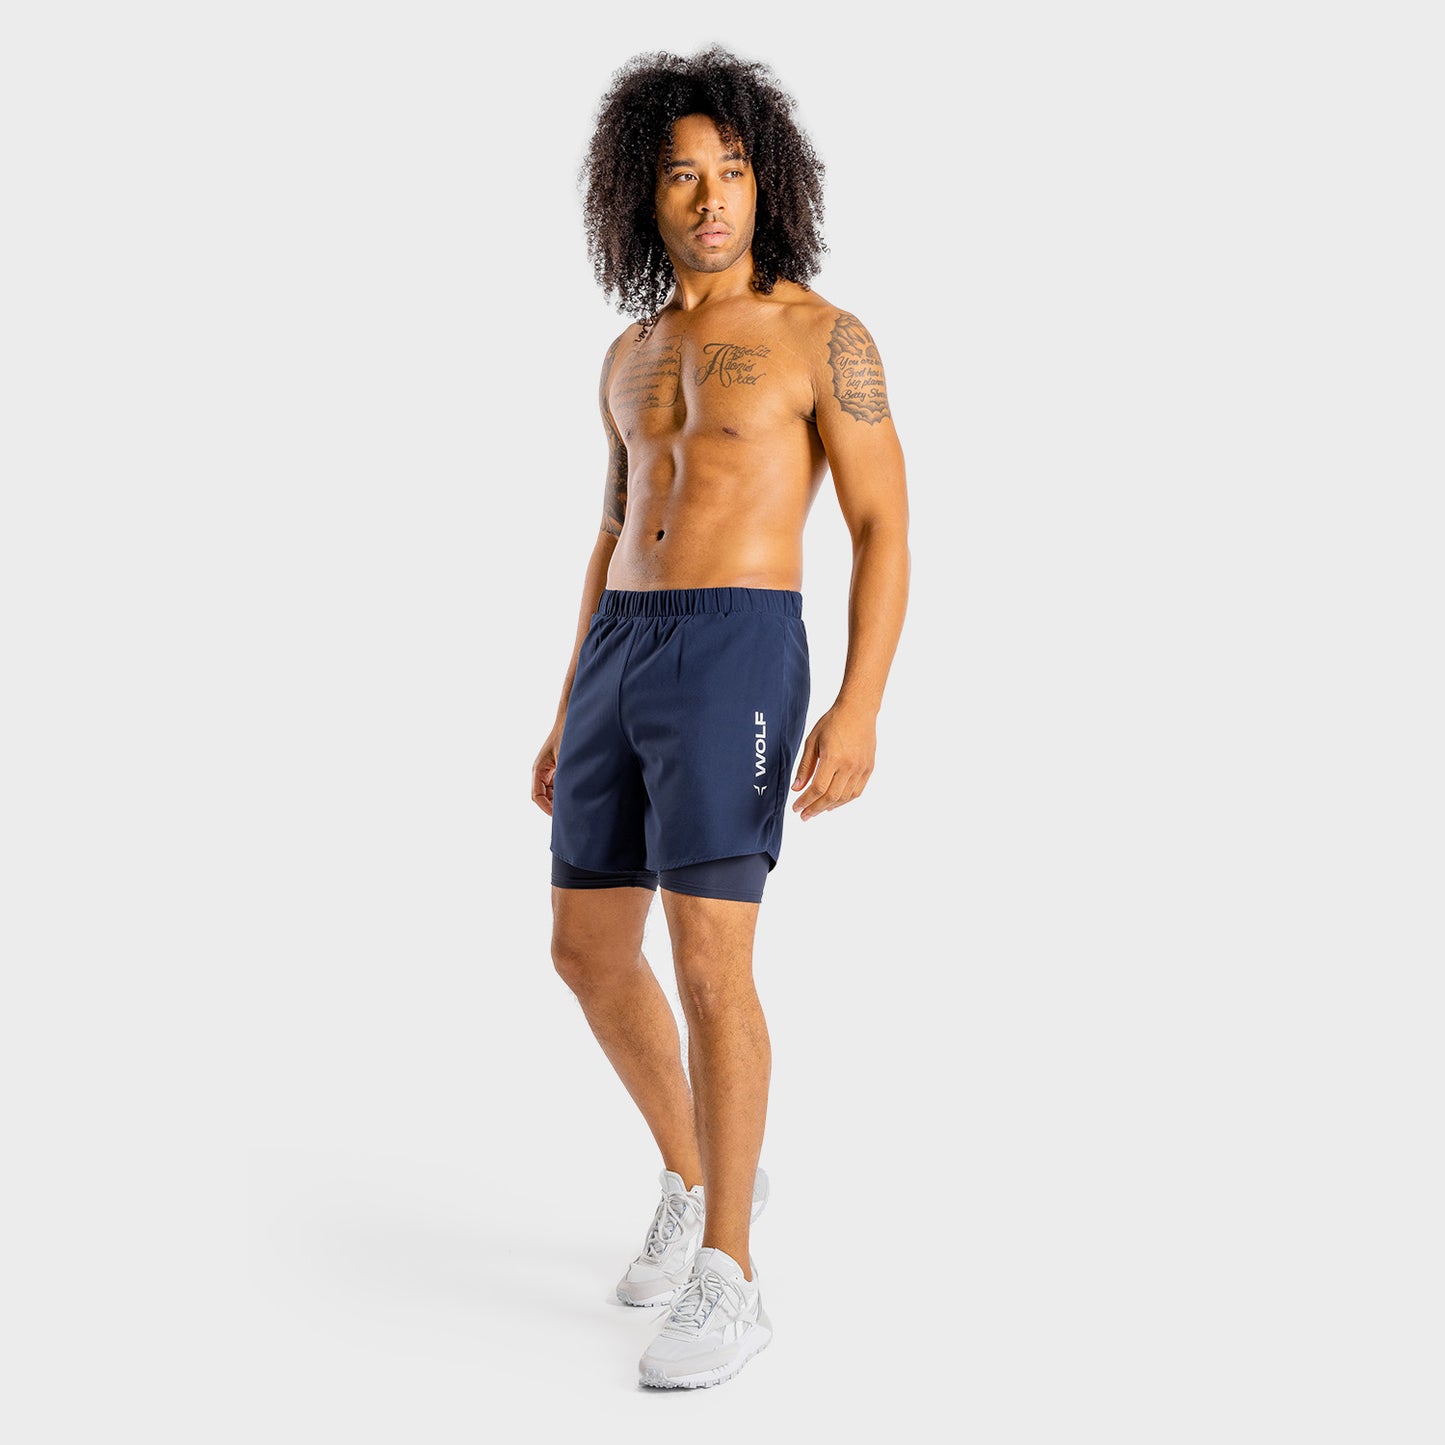 squatwolf-gym-wear-primal-shorts-2-in-1-navy-workout-shorts-for-men